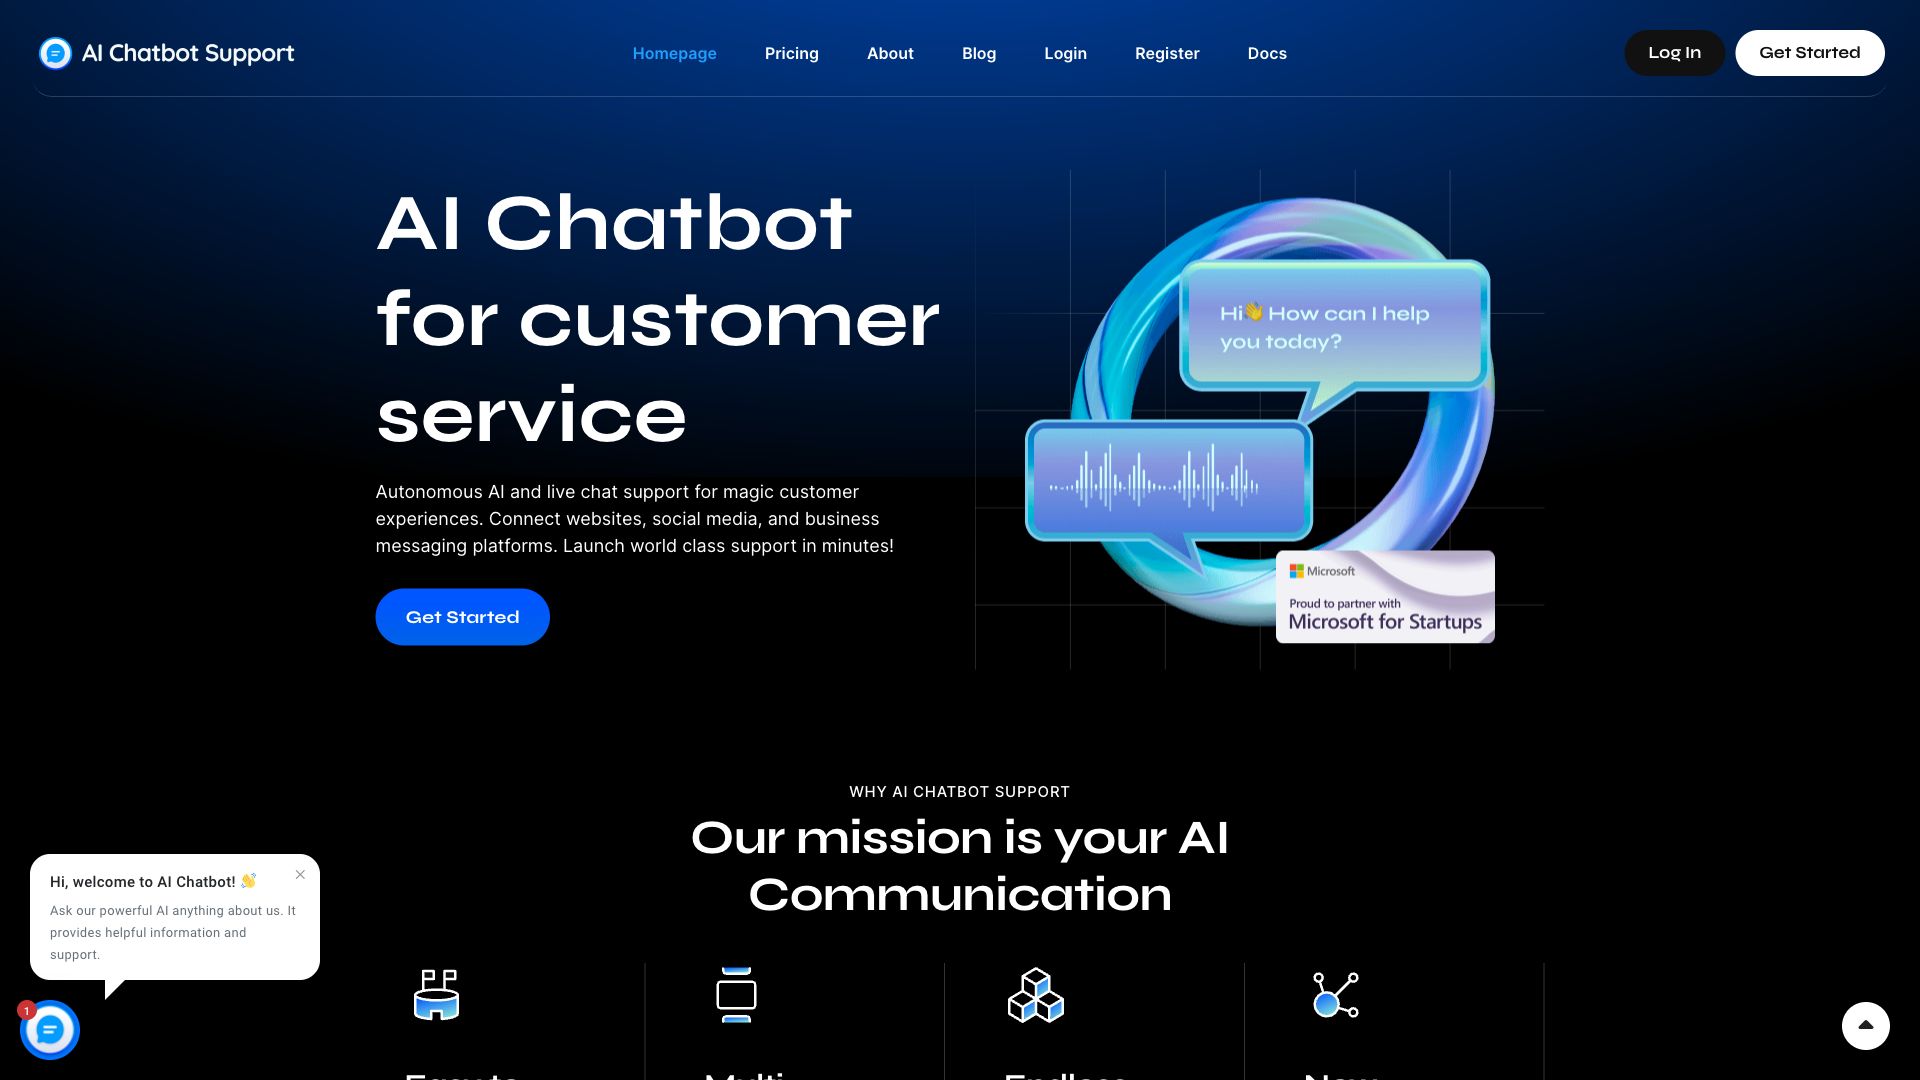 AI Chatbot Support